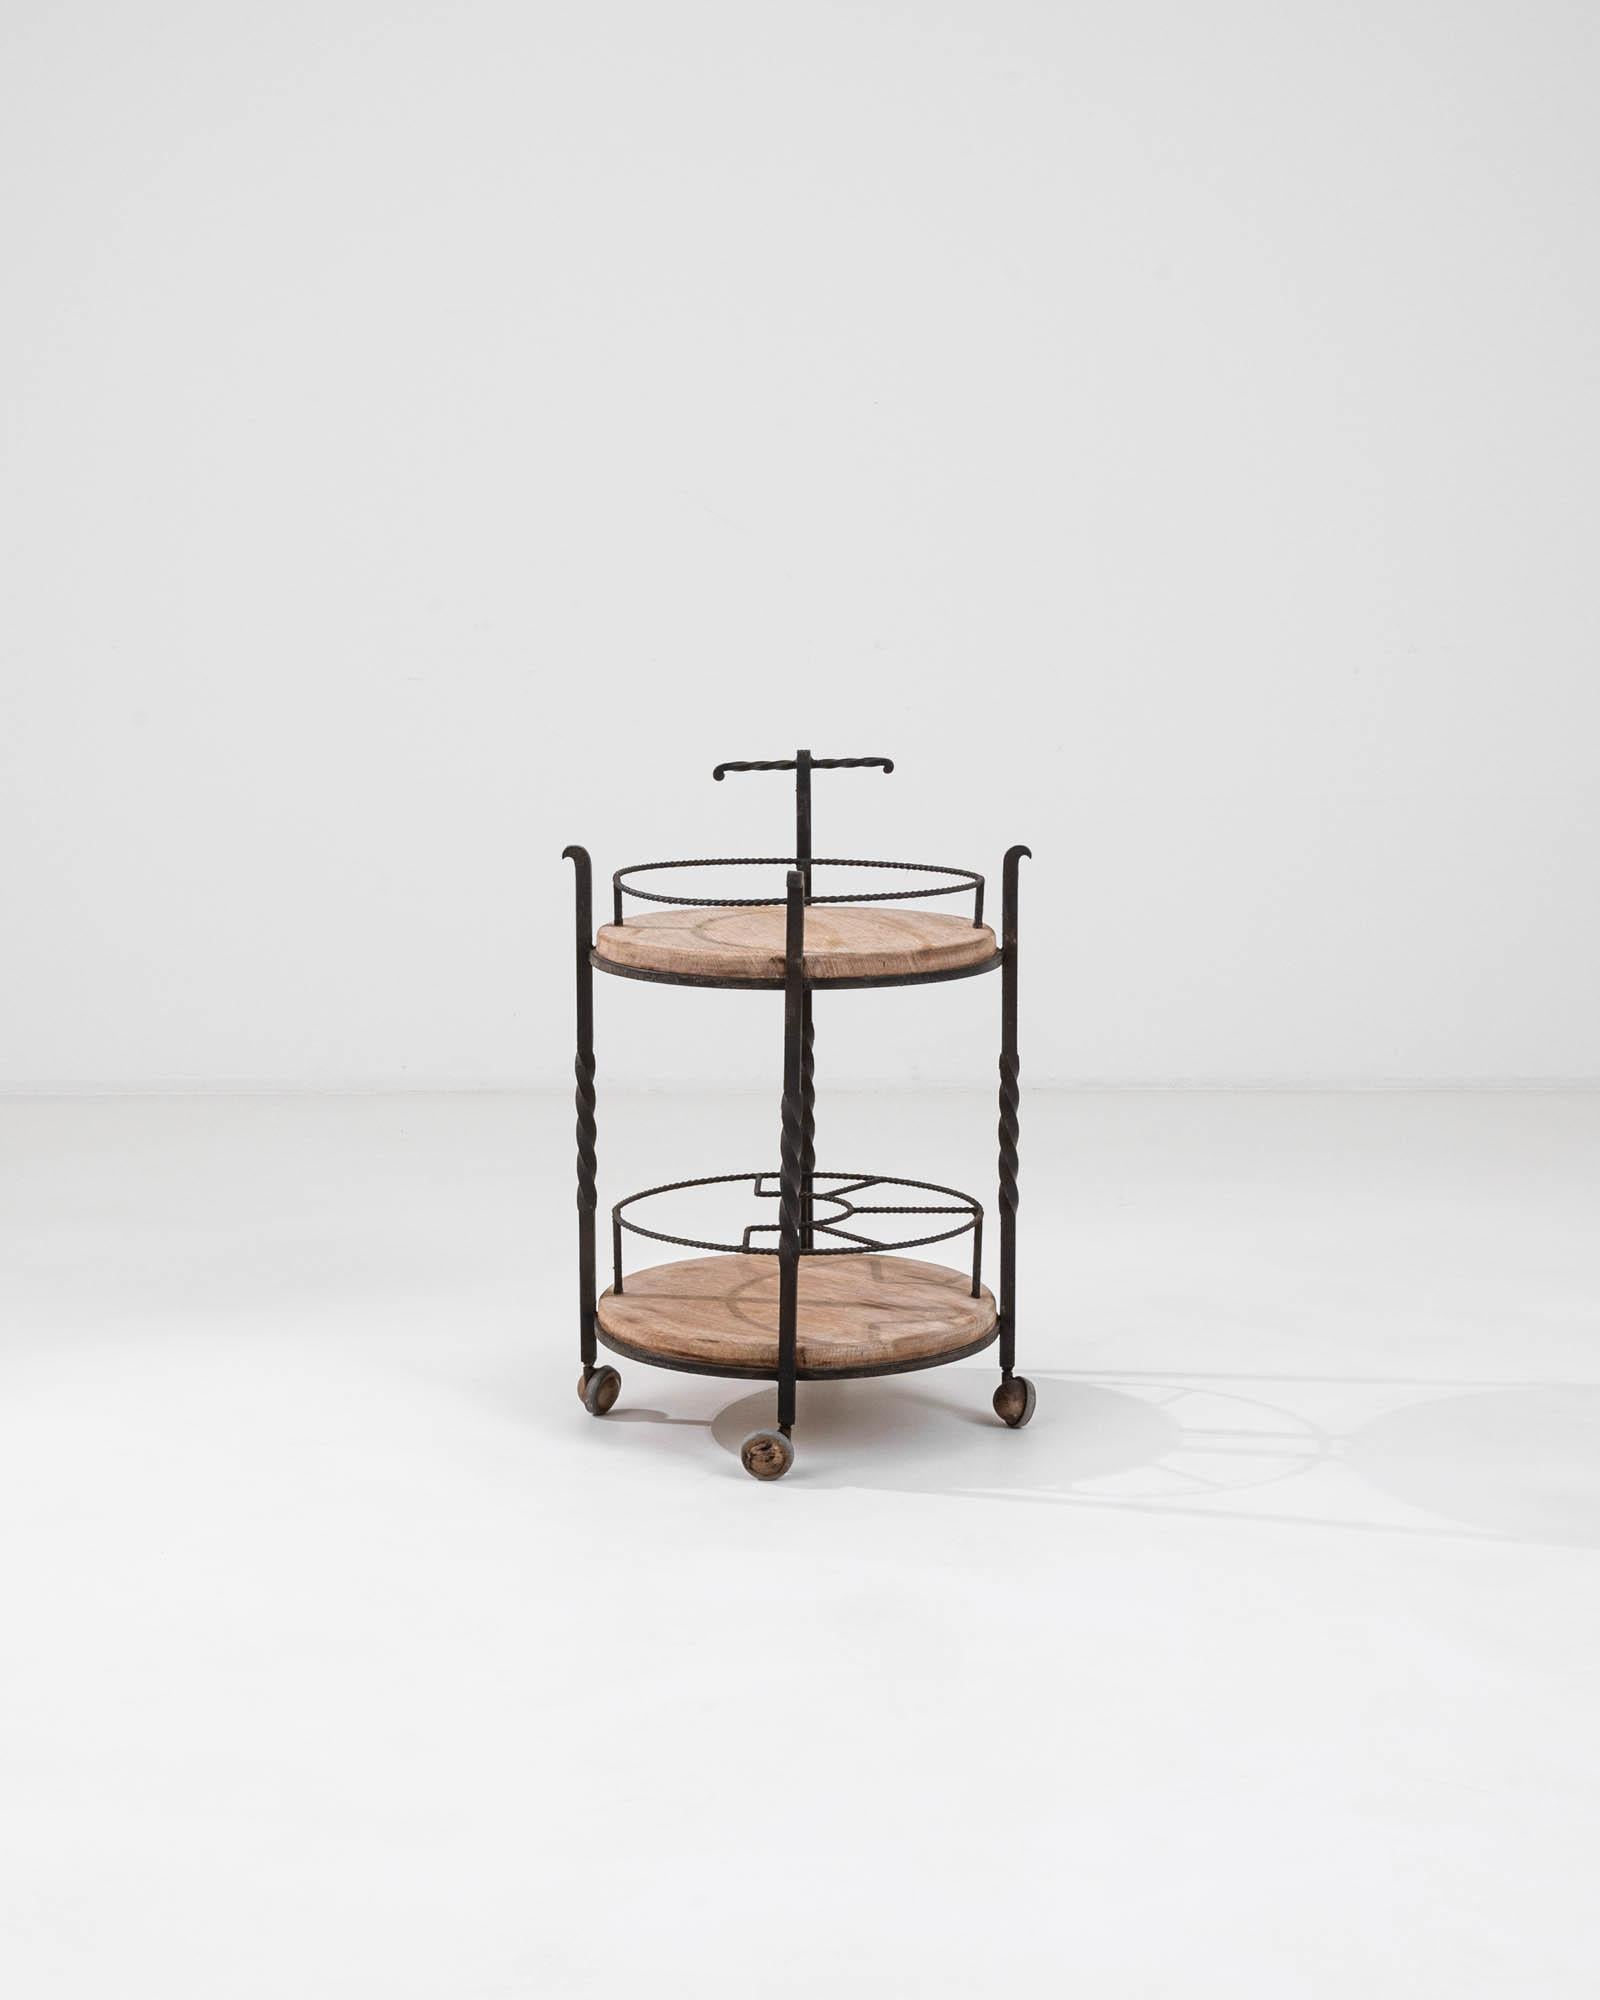 Delight in the vintage charm and functionality of this 20th Century French Metal & Wooden Bar Cart. Crafted with a discerning eye for style, this cart features an elegant marriage of warm wood and wrought iron, delivering both beauty and utility to